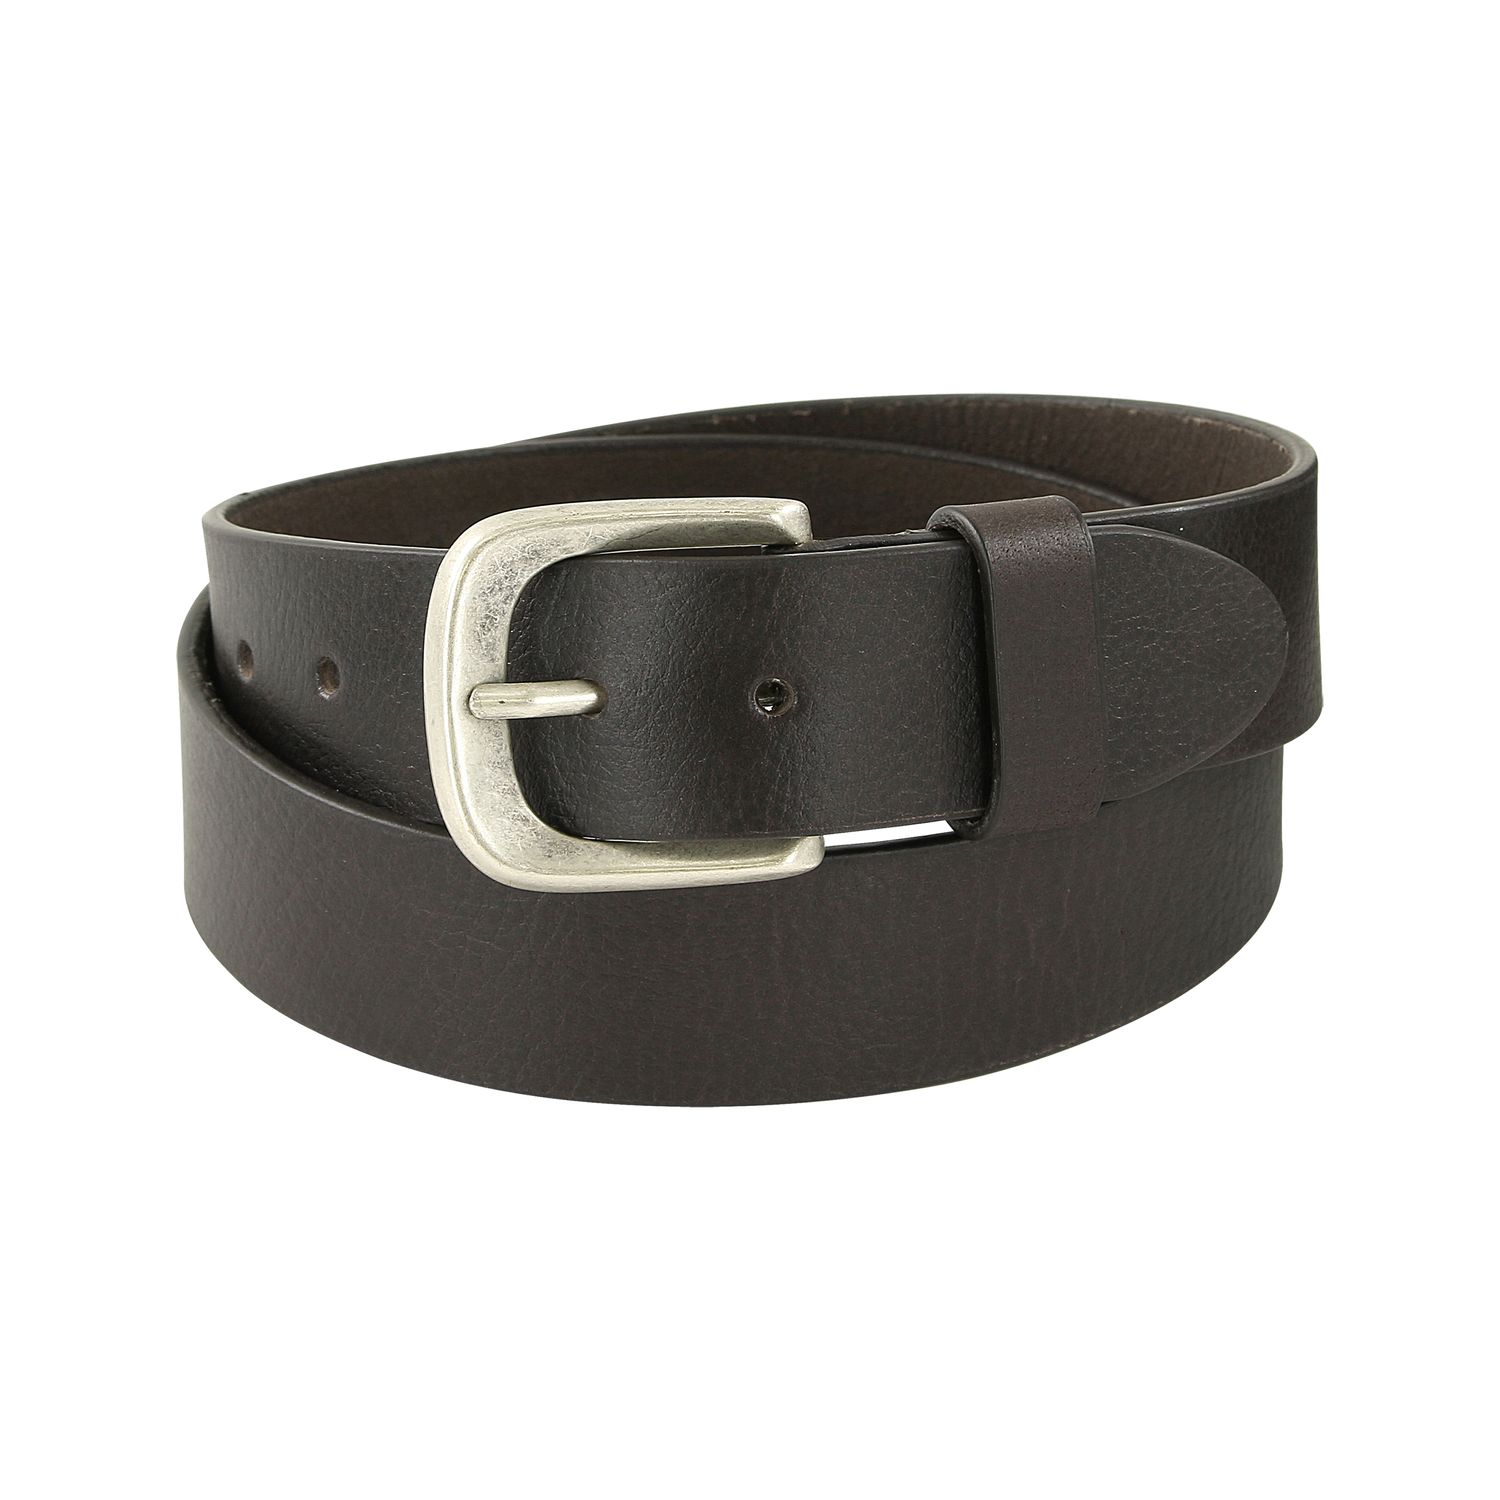 Buffalo leather belt in brown by Pionier in large sizes 95 - 150